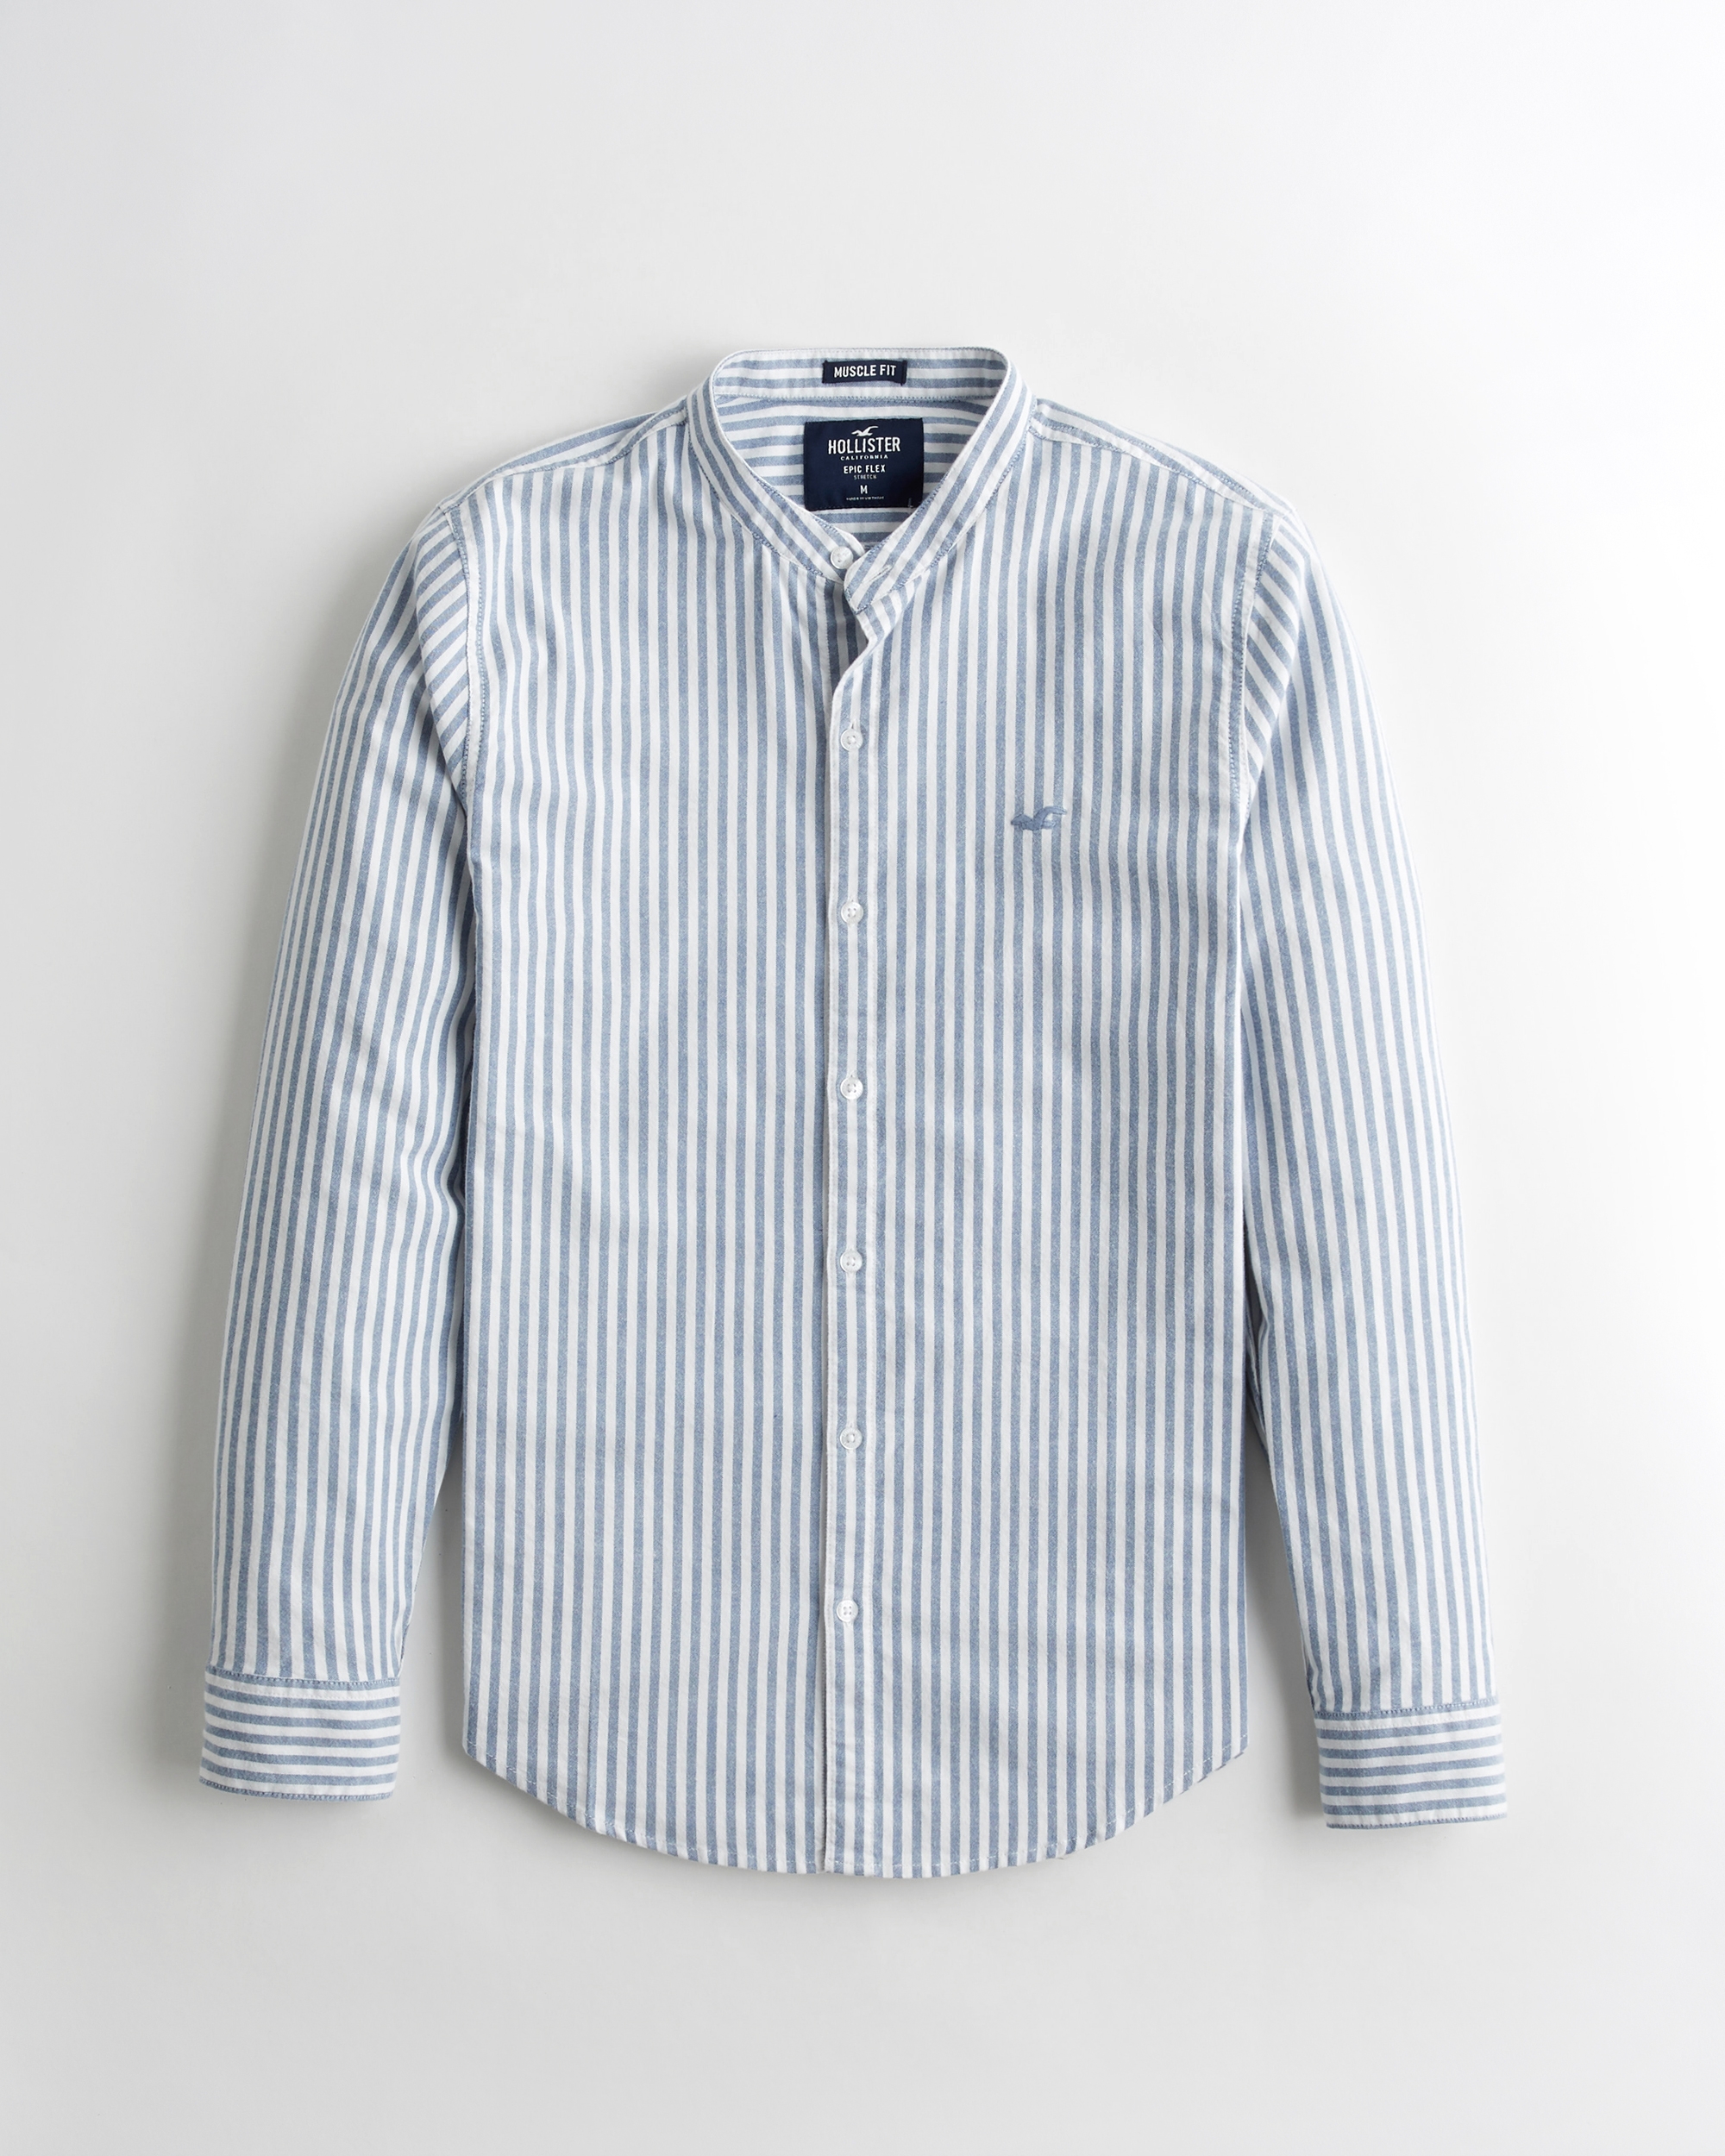 hollister black and white striped shirt